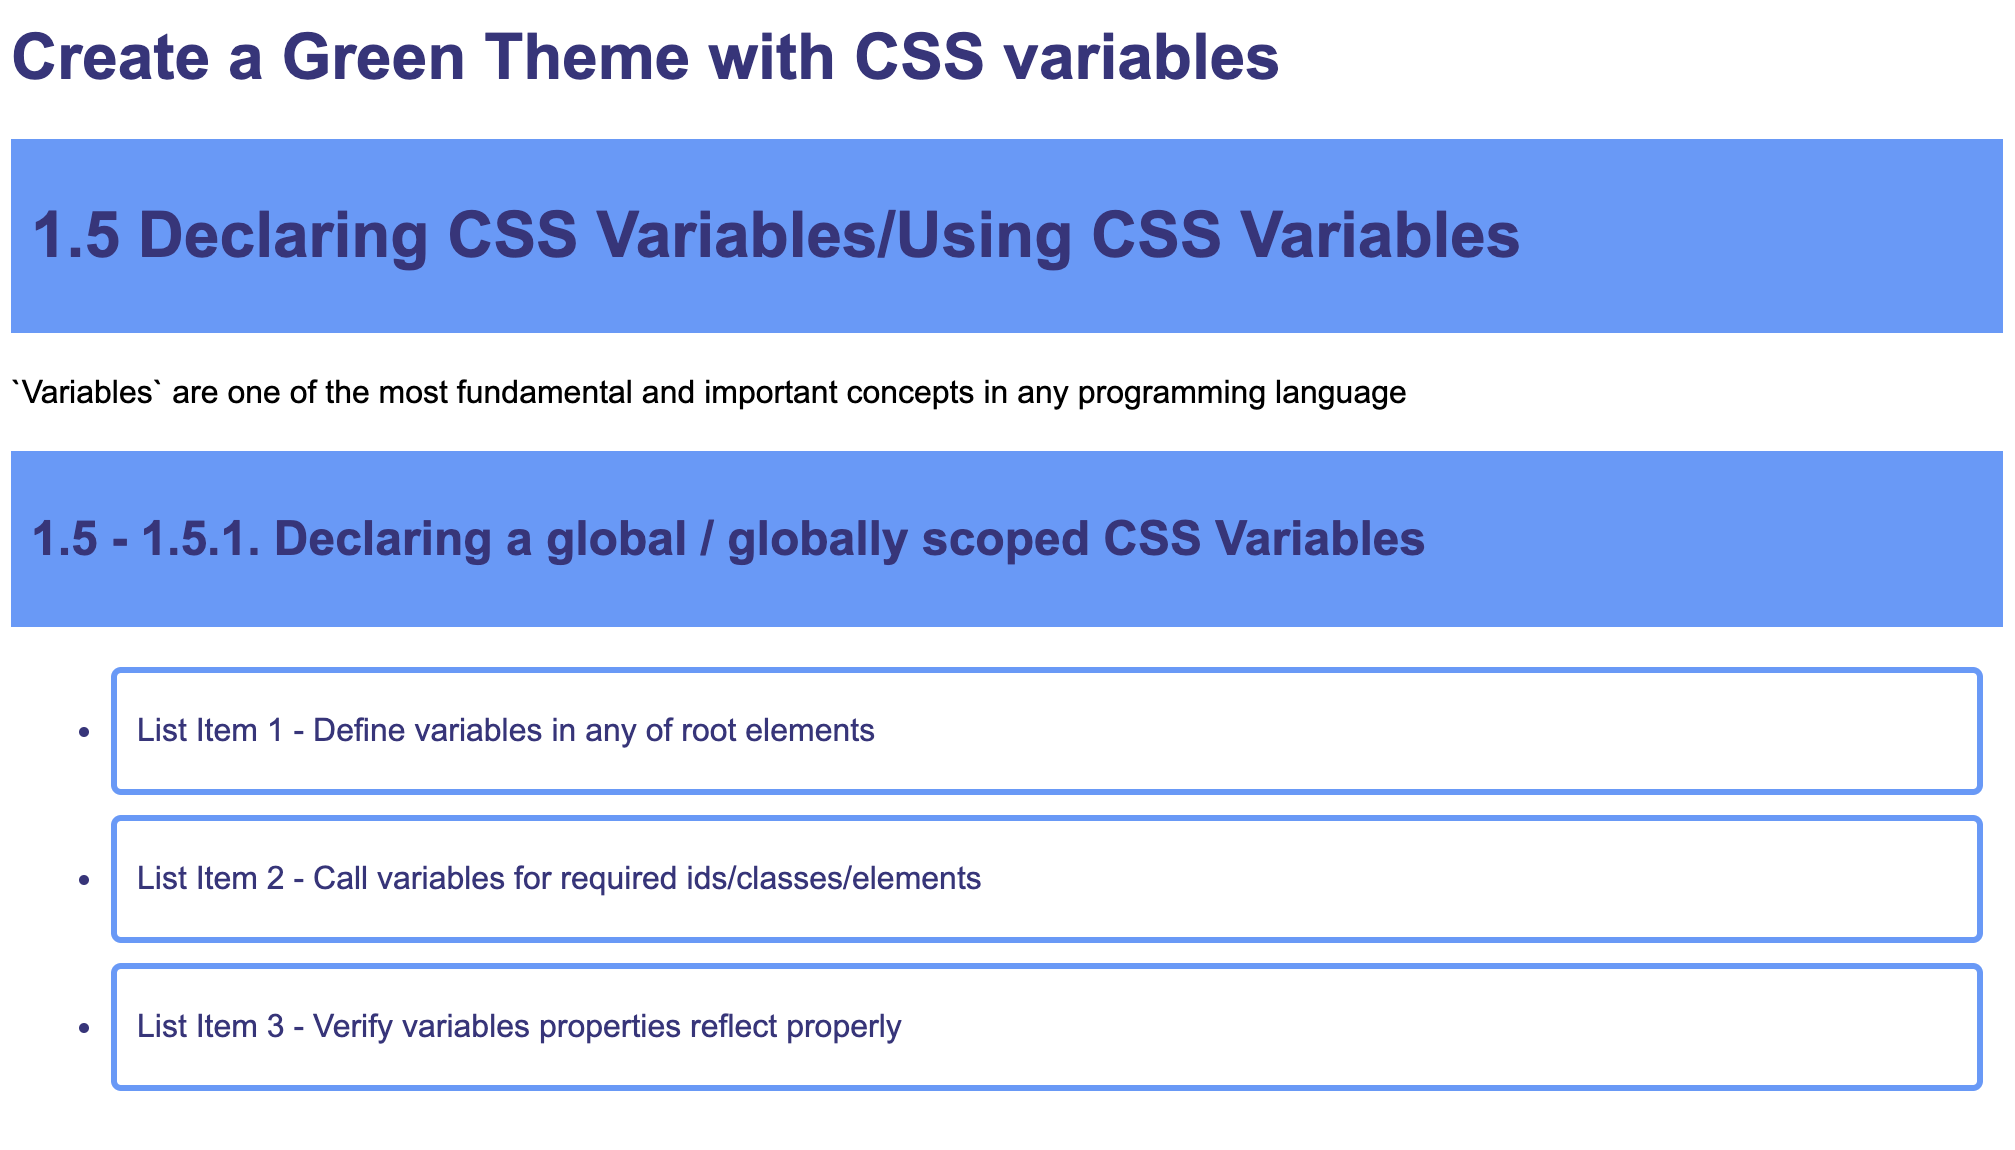 Declaring & Using CSS Variables - Convert to Blue Theme